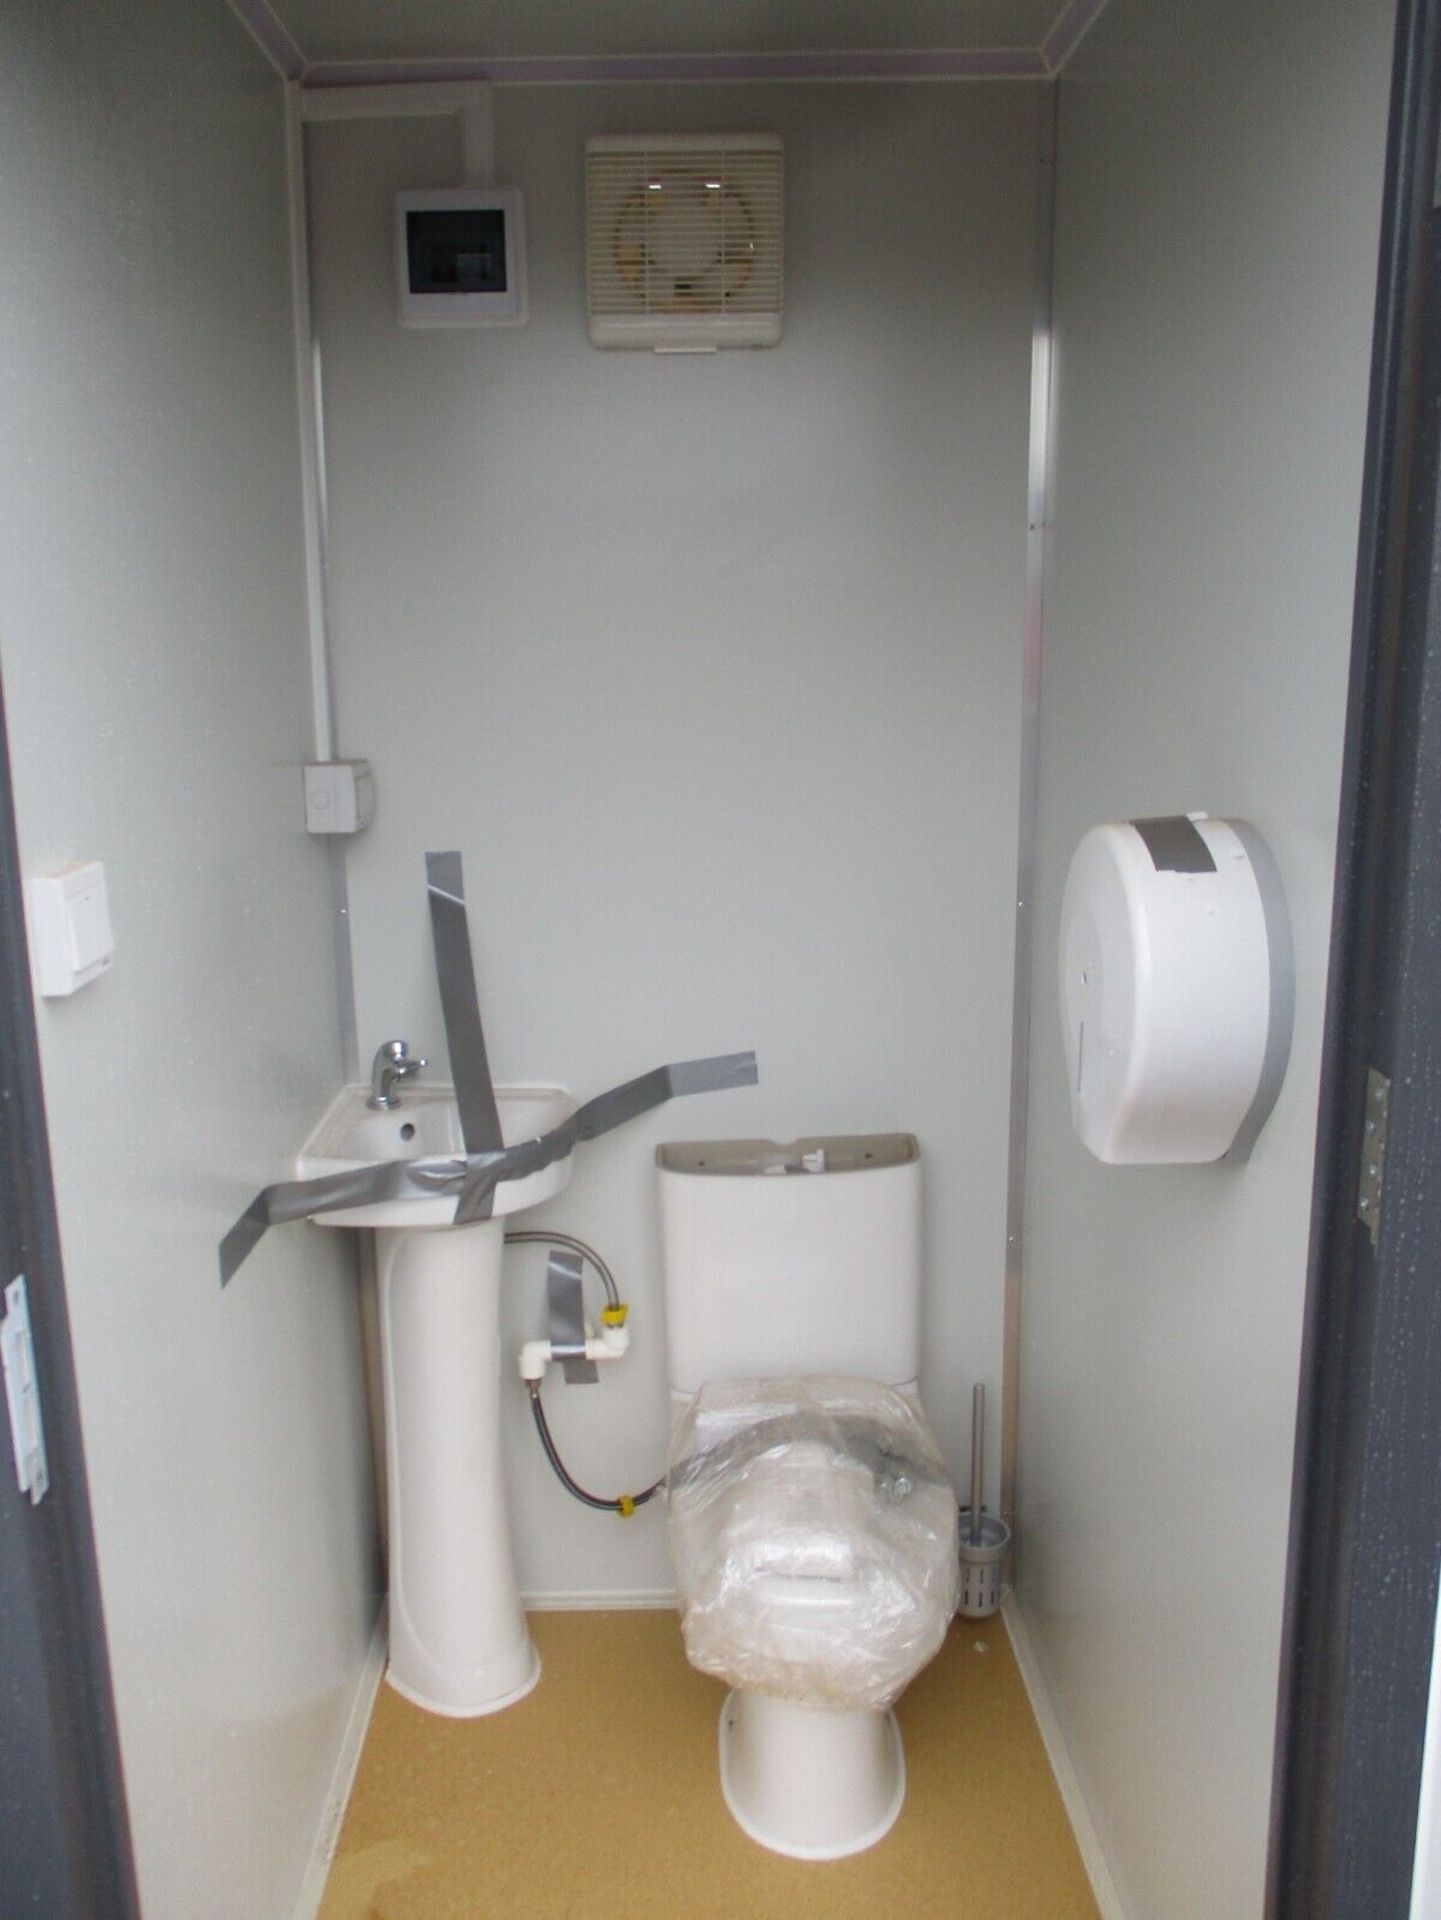 UNUSED 1.1M X 1.3M TOILET BLOCK SHIPPING CONTAINER - Image 5 of 5